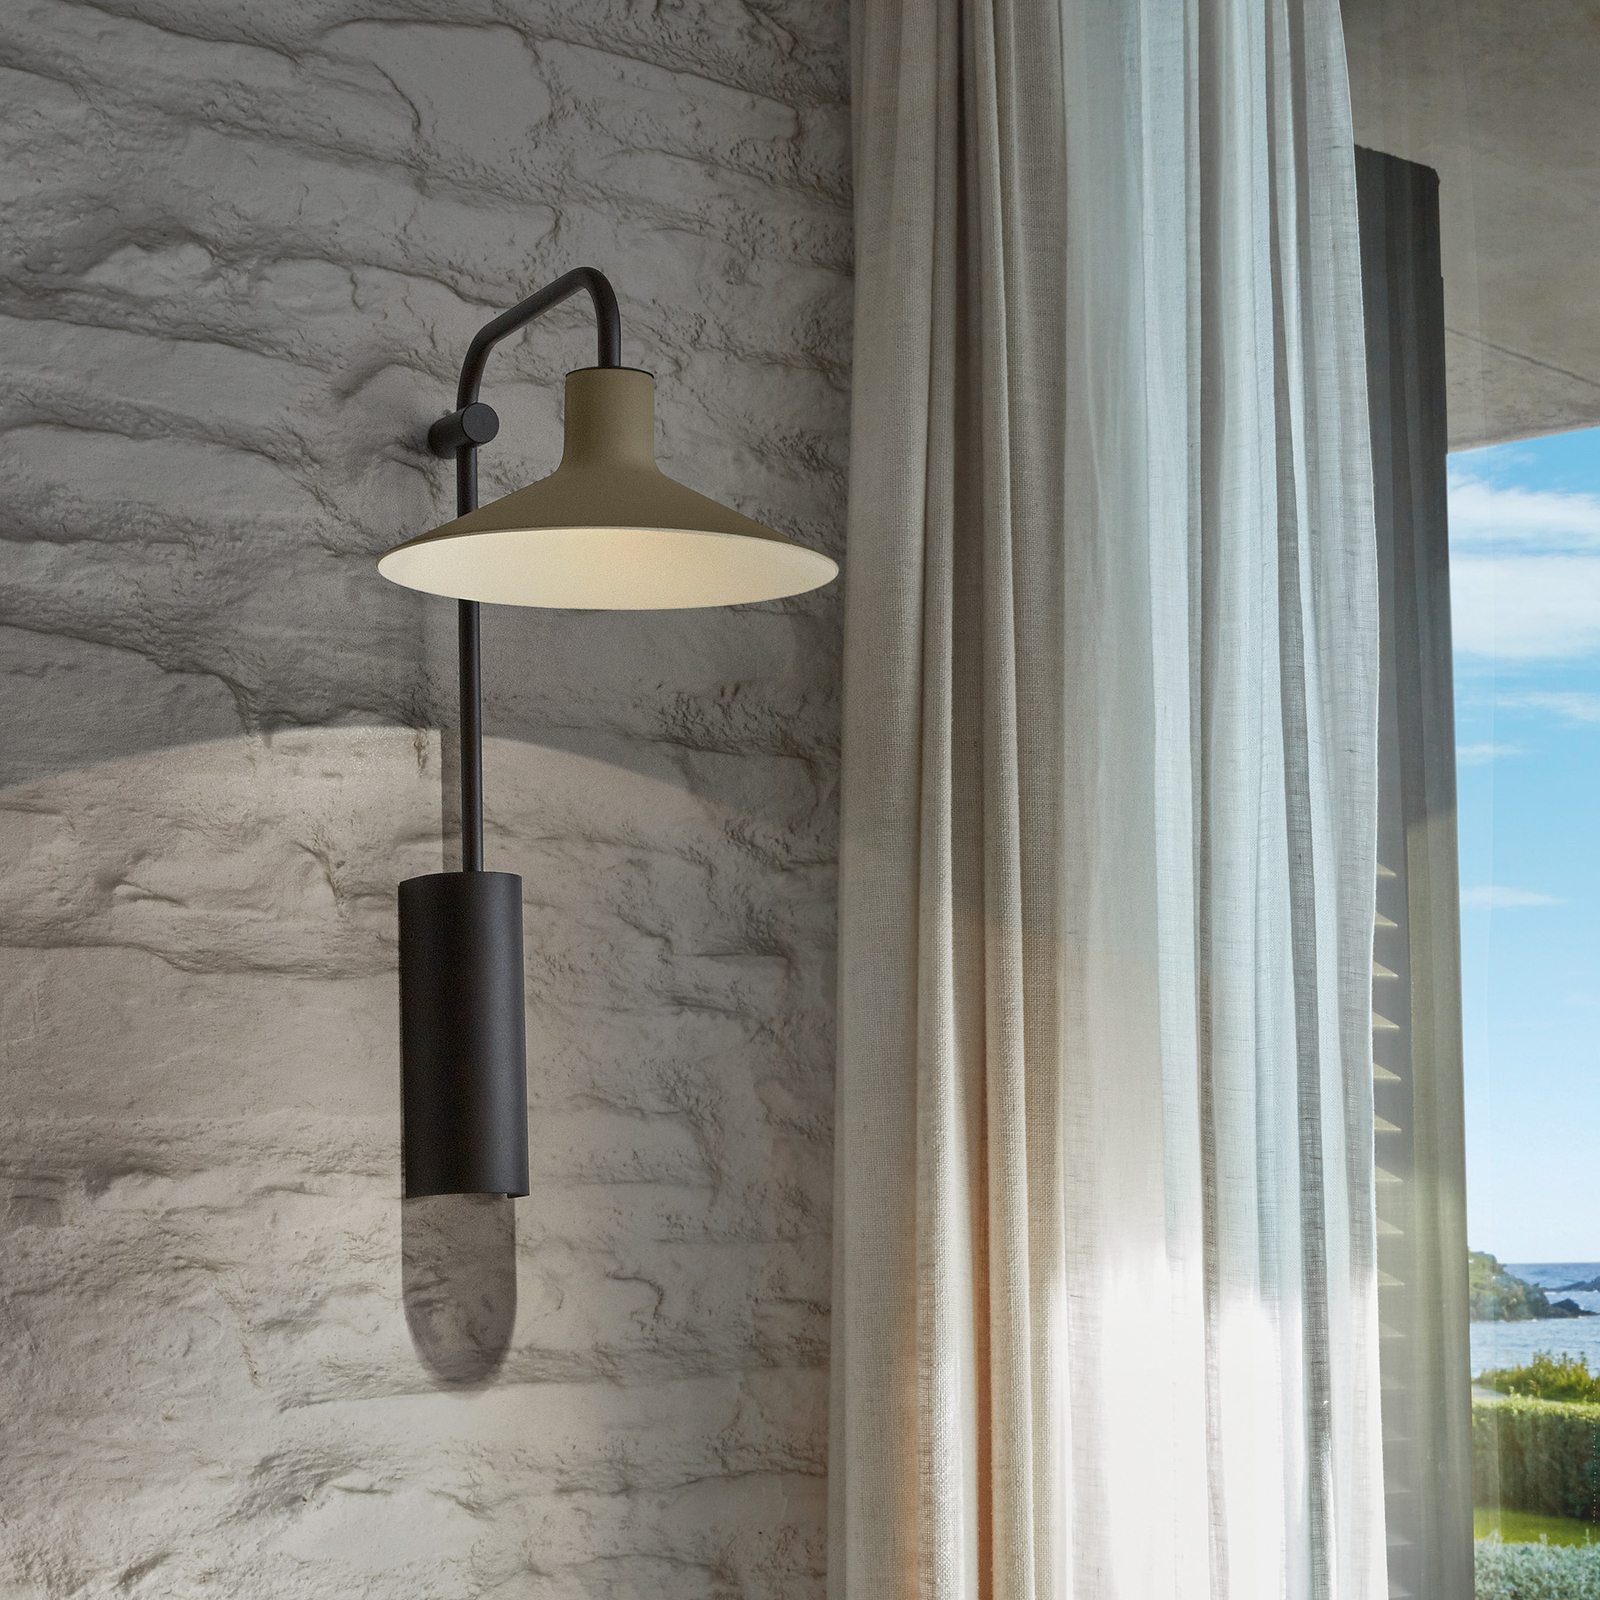 Bover Platet A02 wall lamp E14 with switch, olive